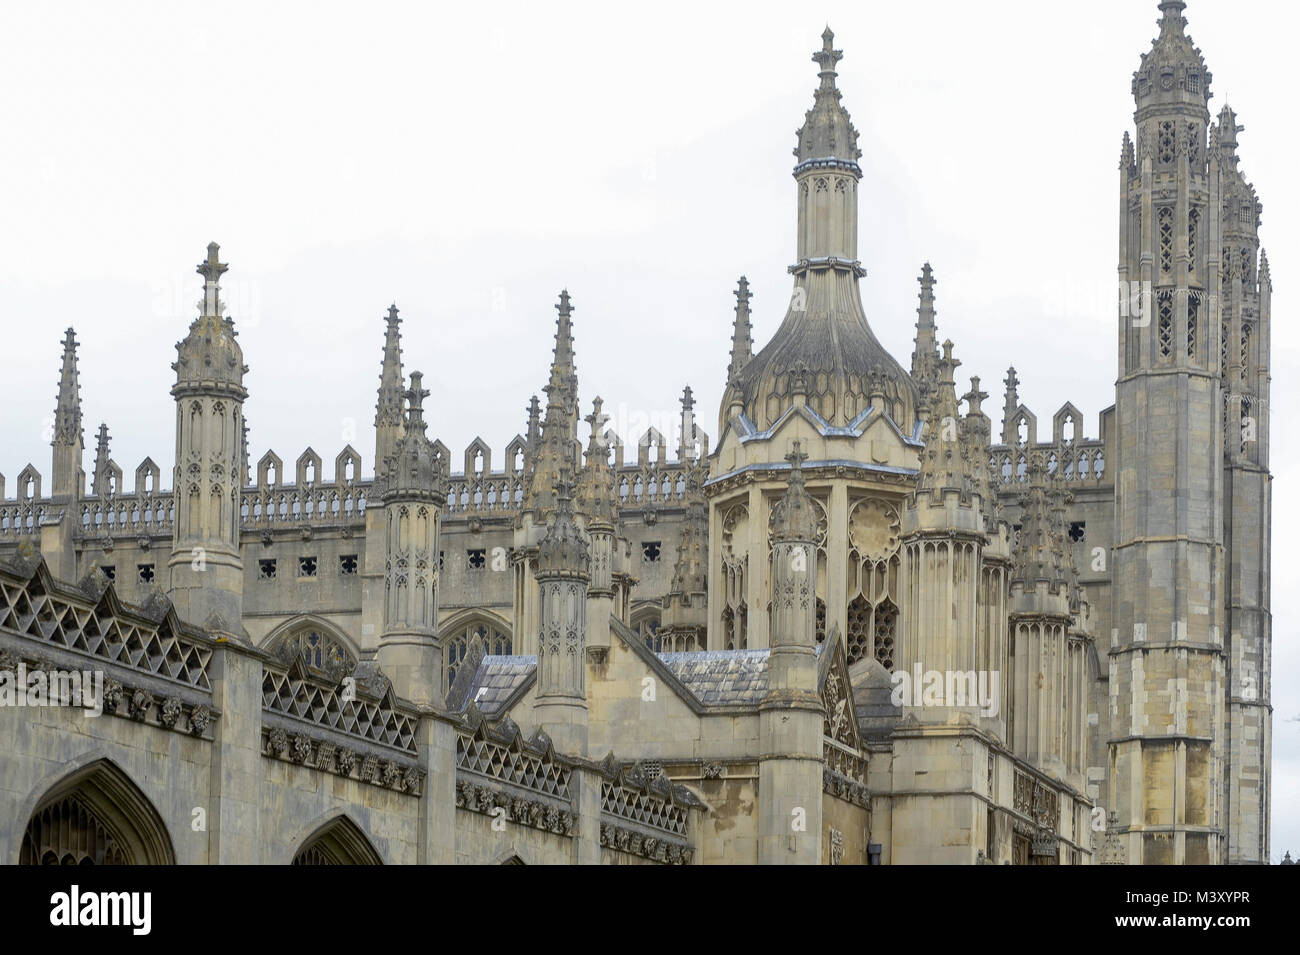 Perpendicular Gothic King's College Chapel built 1446-1515 of King's College, University of Cambridge one of the oldest universities in the world. His Stock Photo